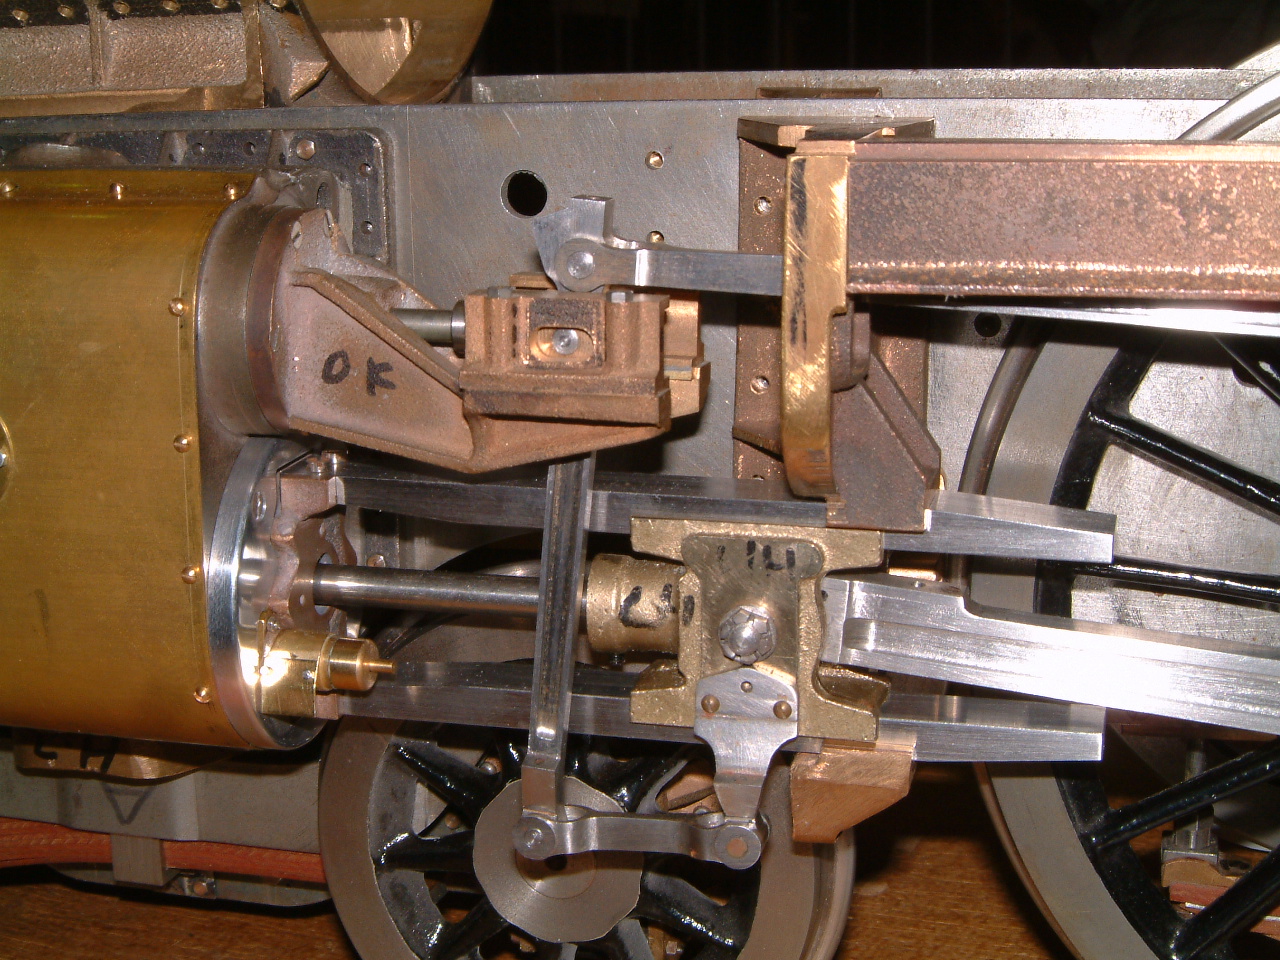 there is an image of an old fashioned machine